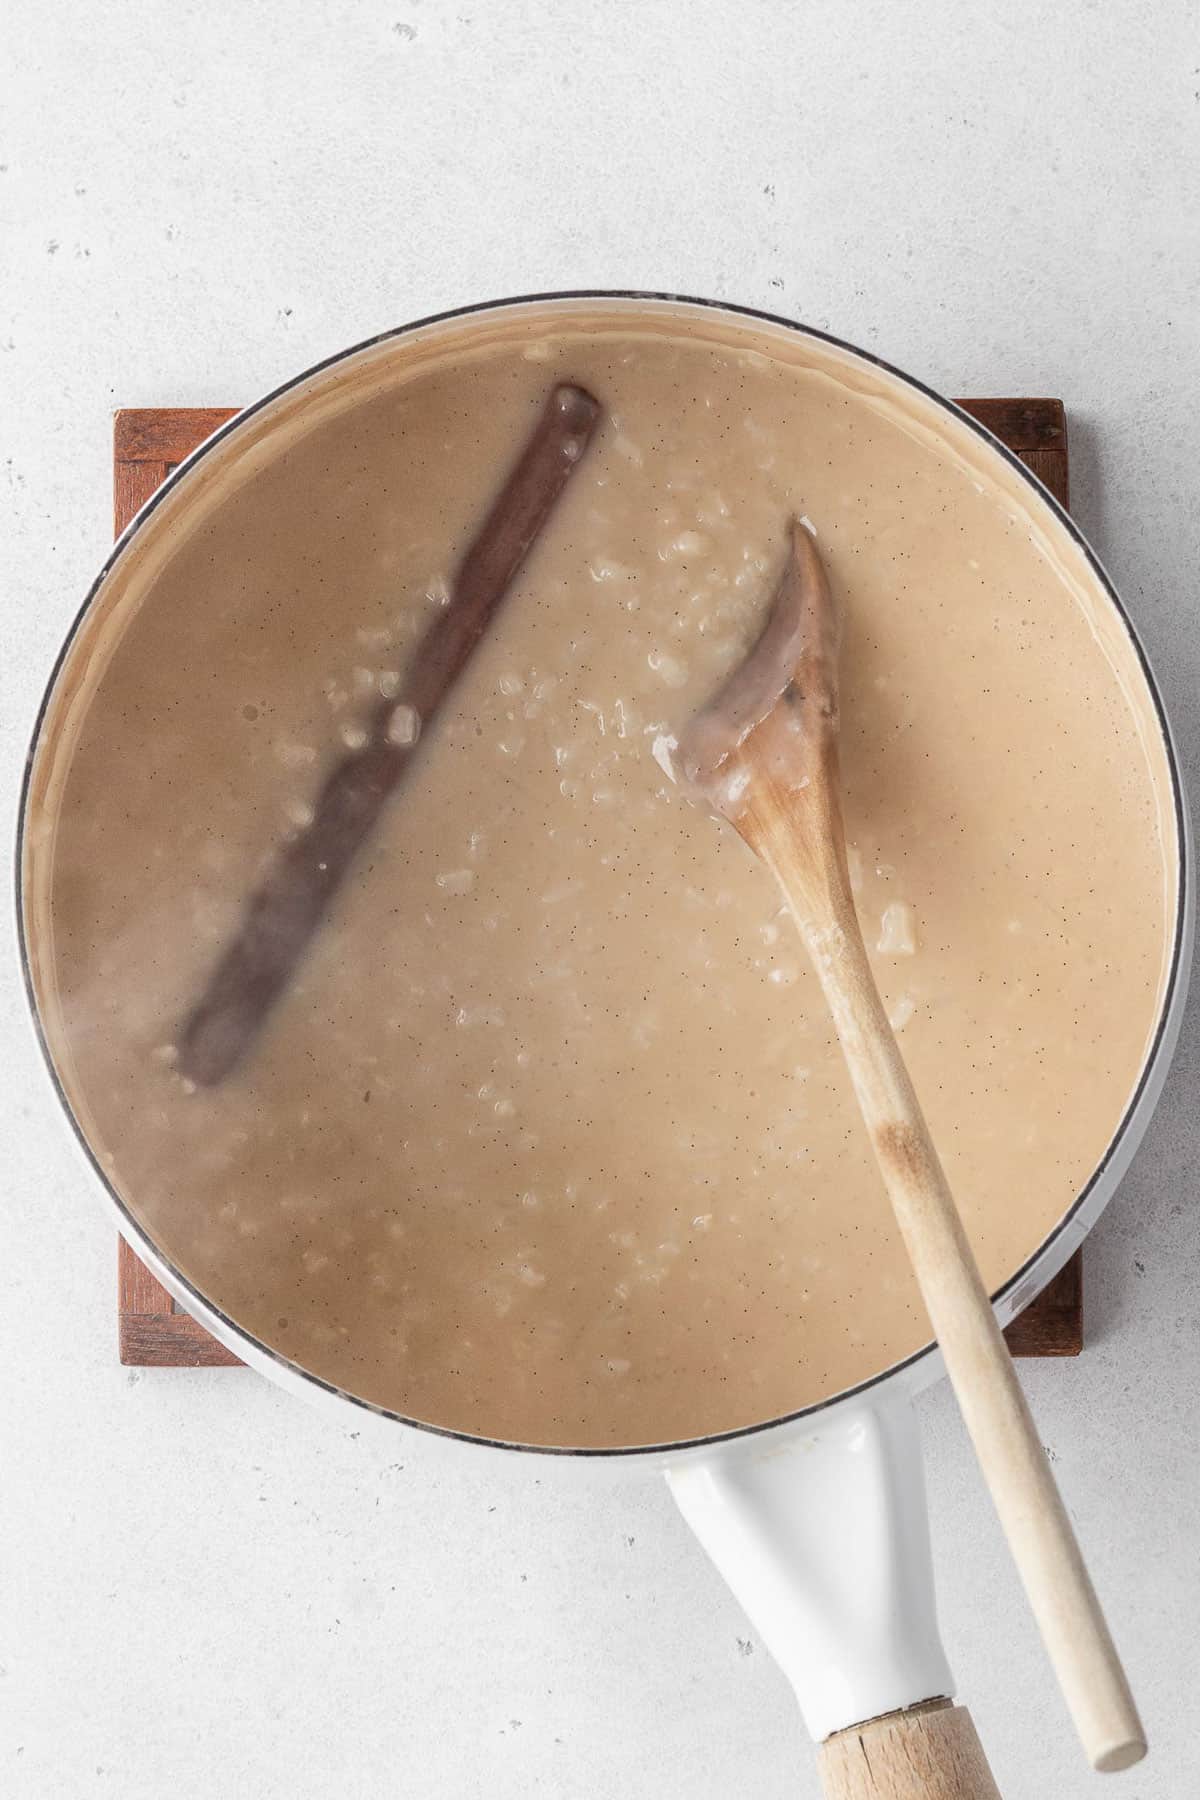 Cooked vegan rice pudding in a saucepan with a cinnamon stick and a wooden spoon.